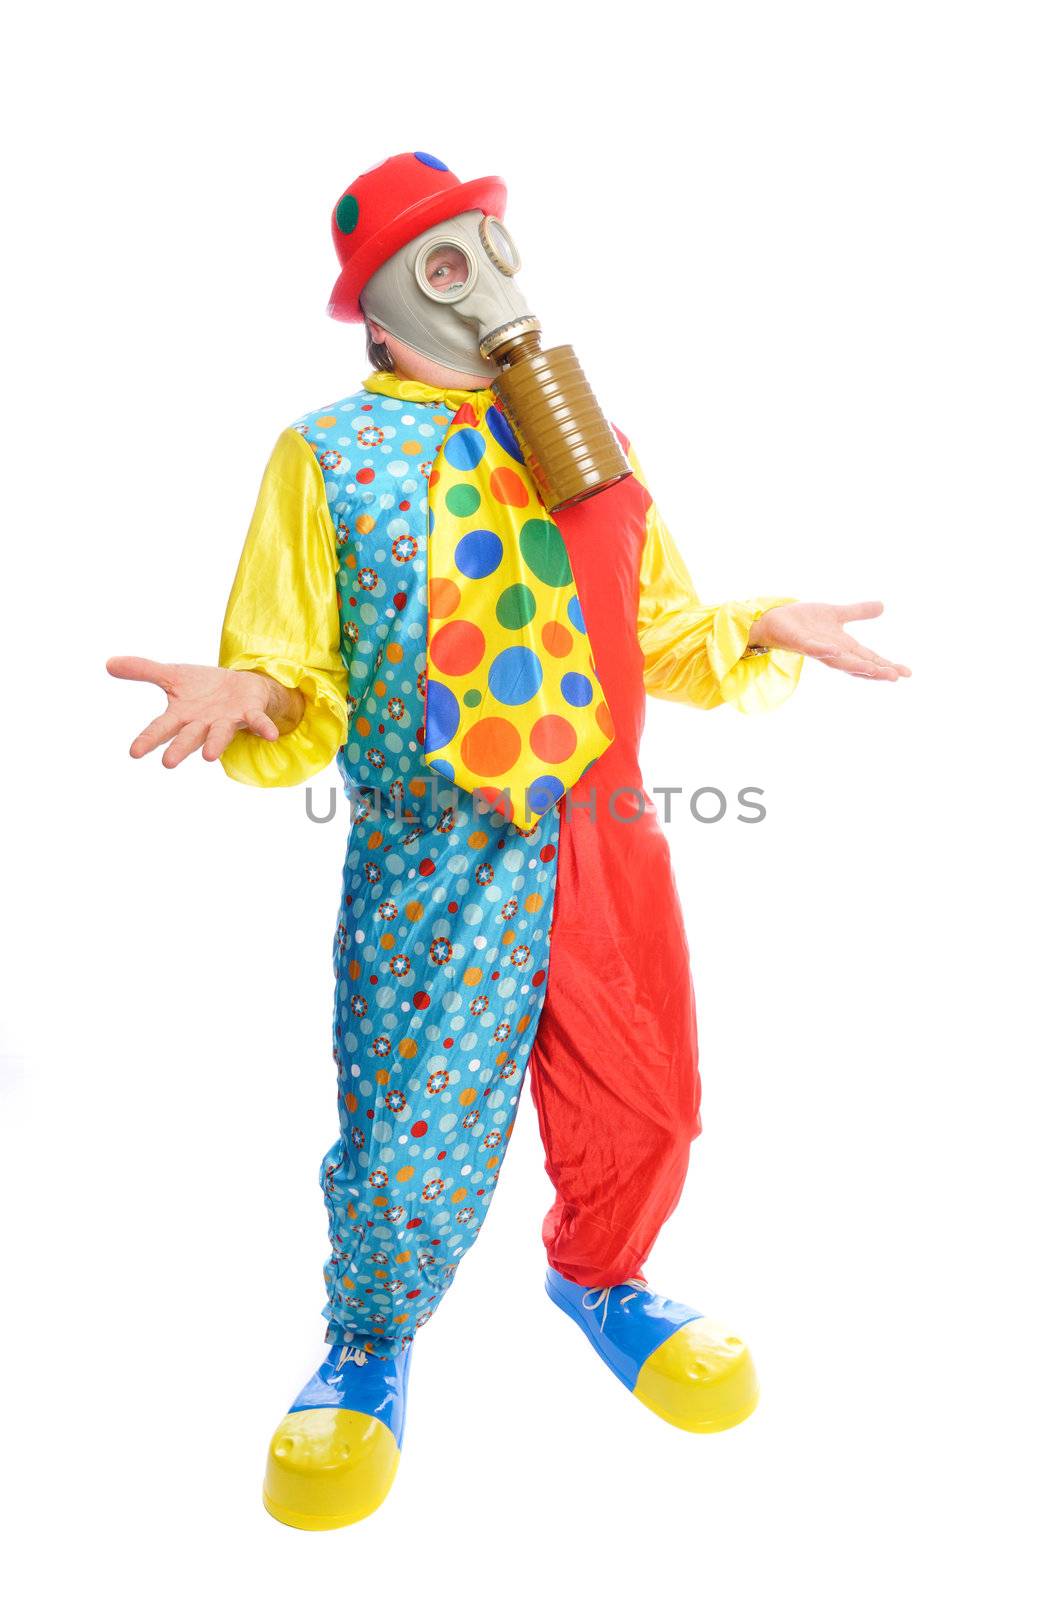 Some clownwearing a gas mask by PDImages